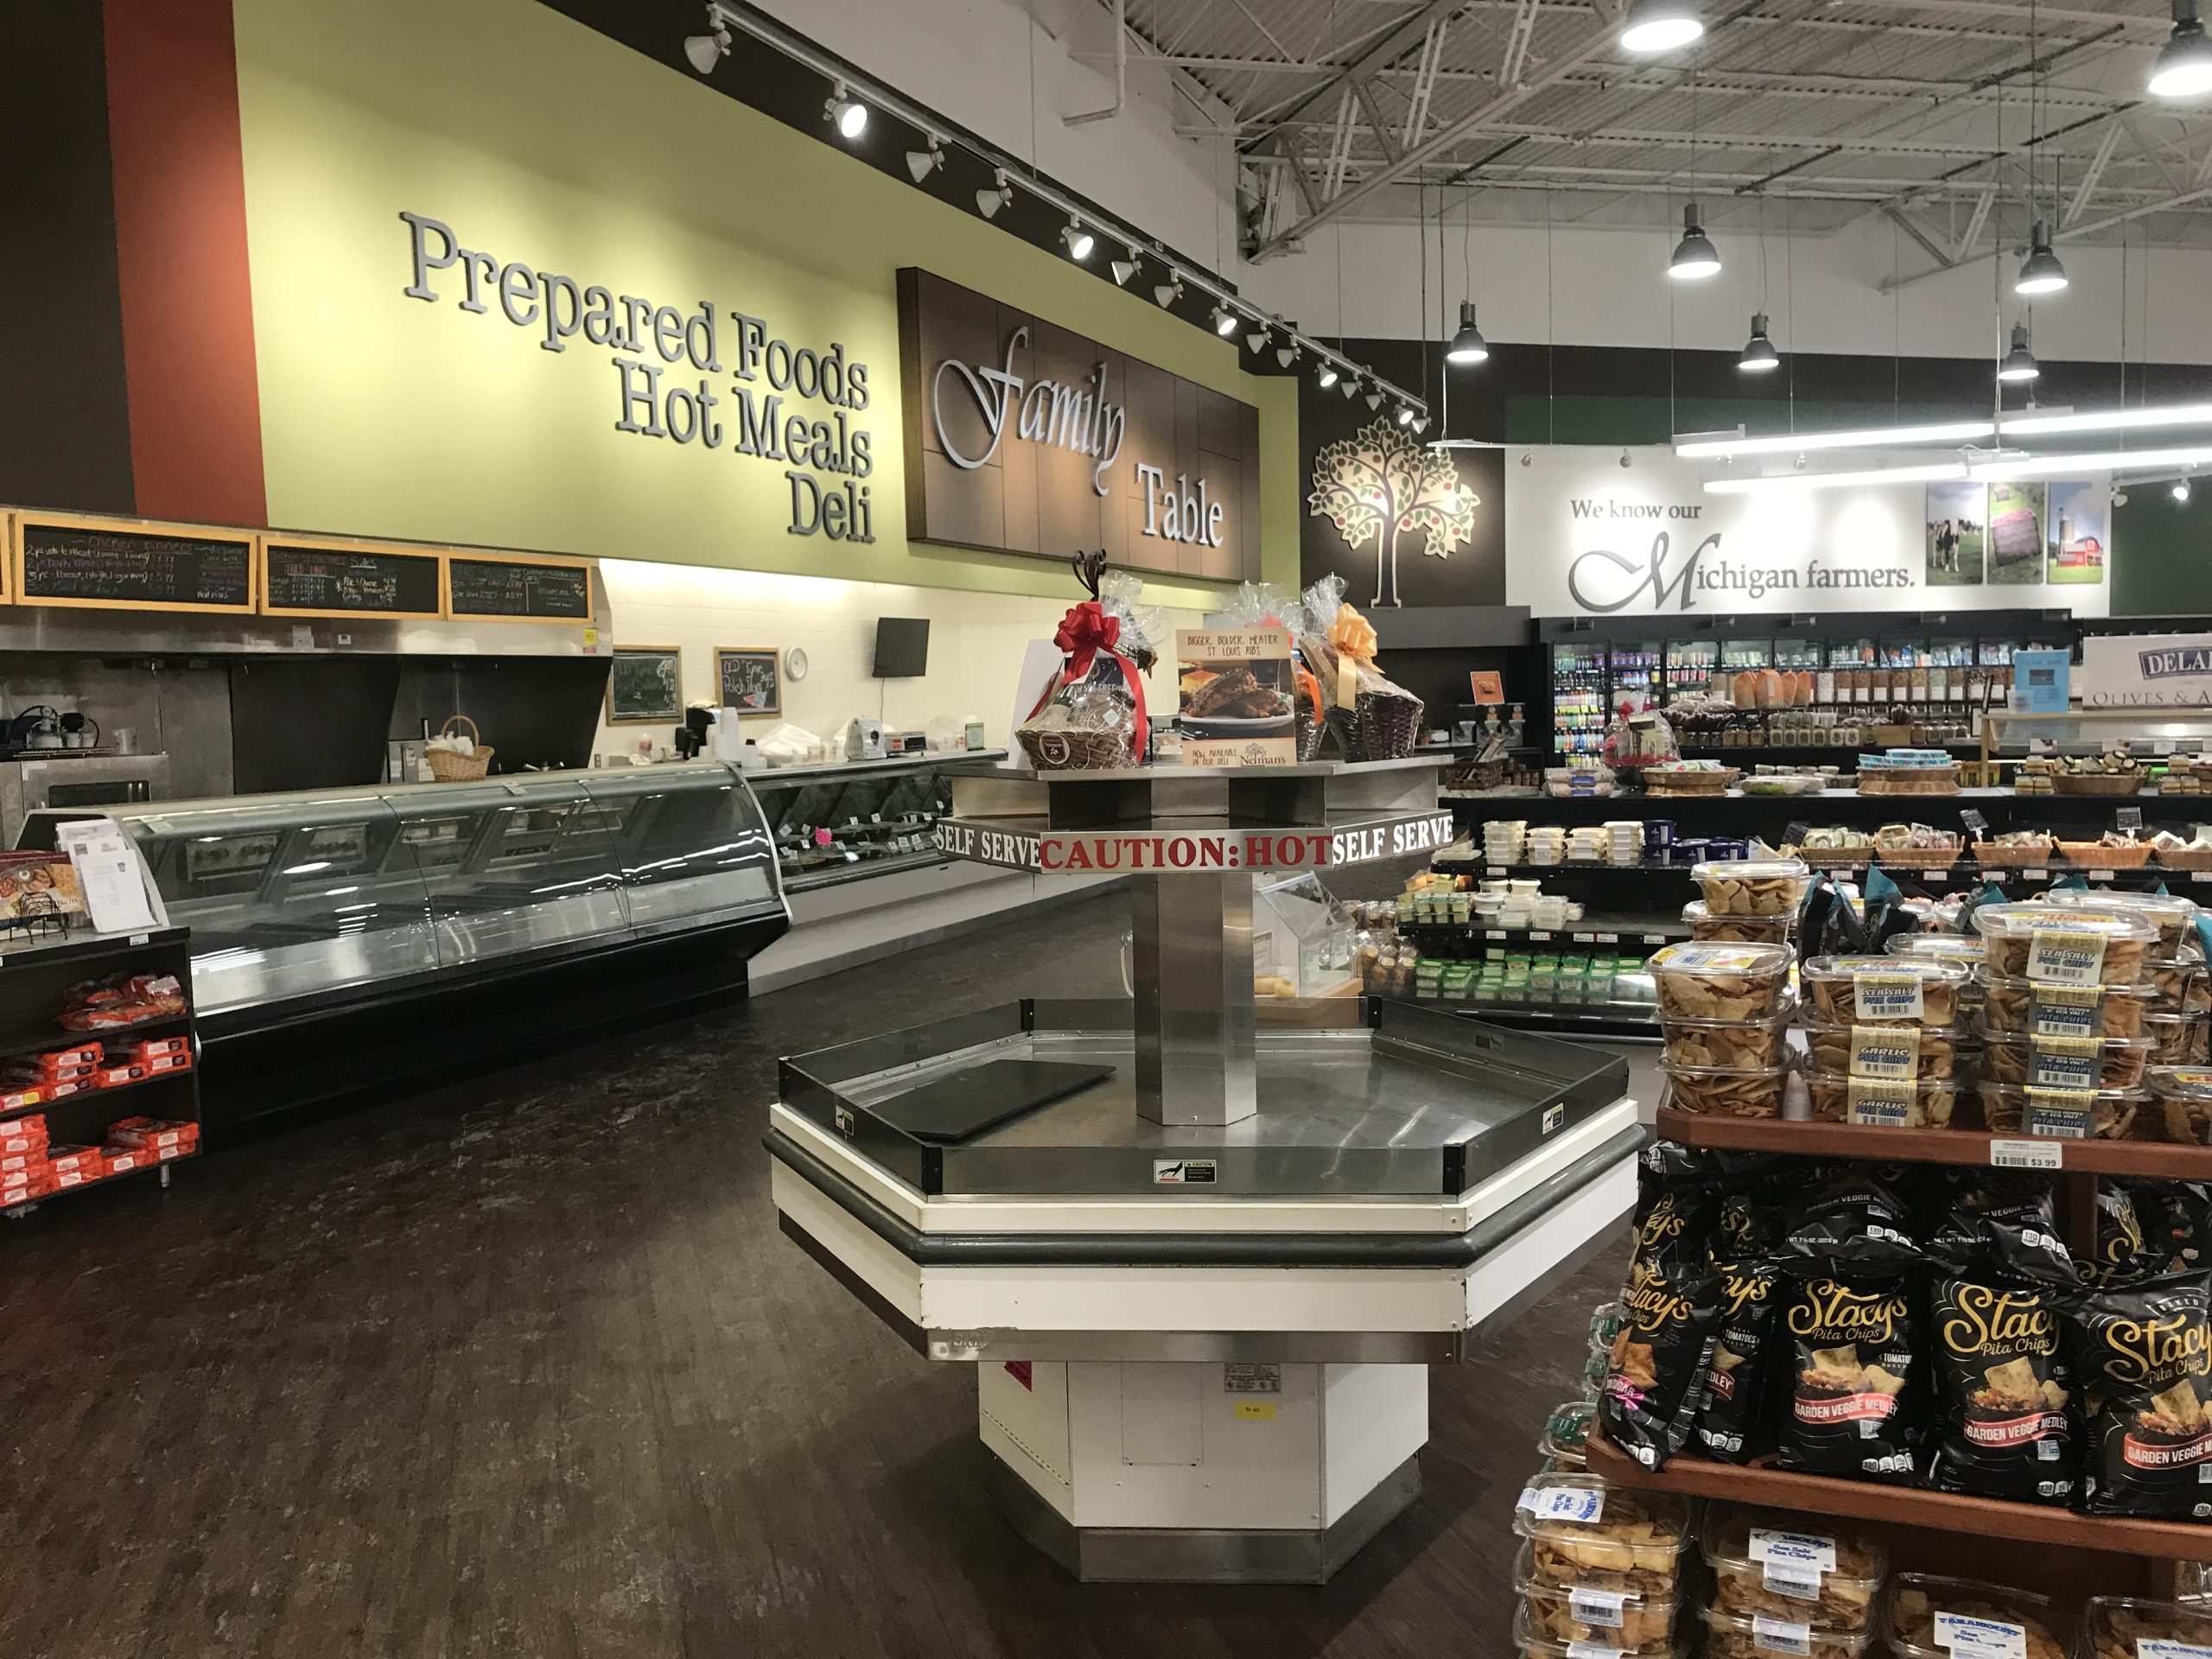 Produce, deli, prepared foods and gourmet popcorn departments highlight the shopping experience per StoreMasters floorplan